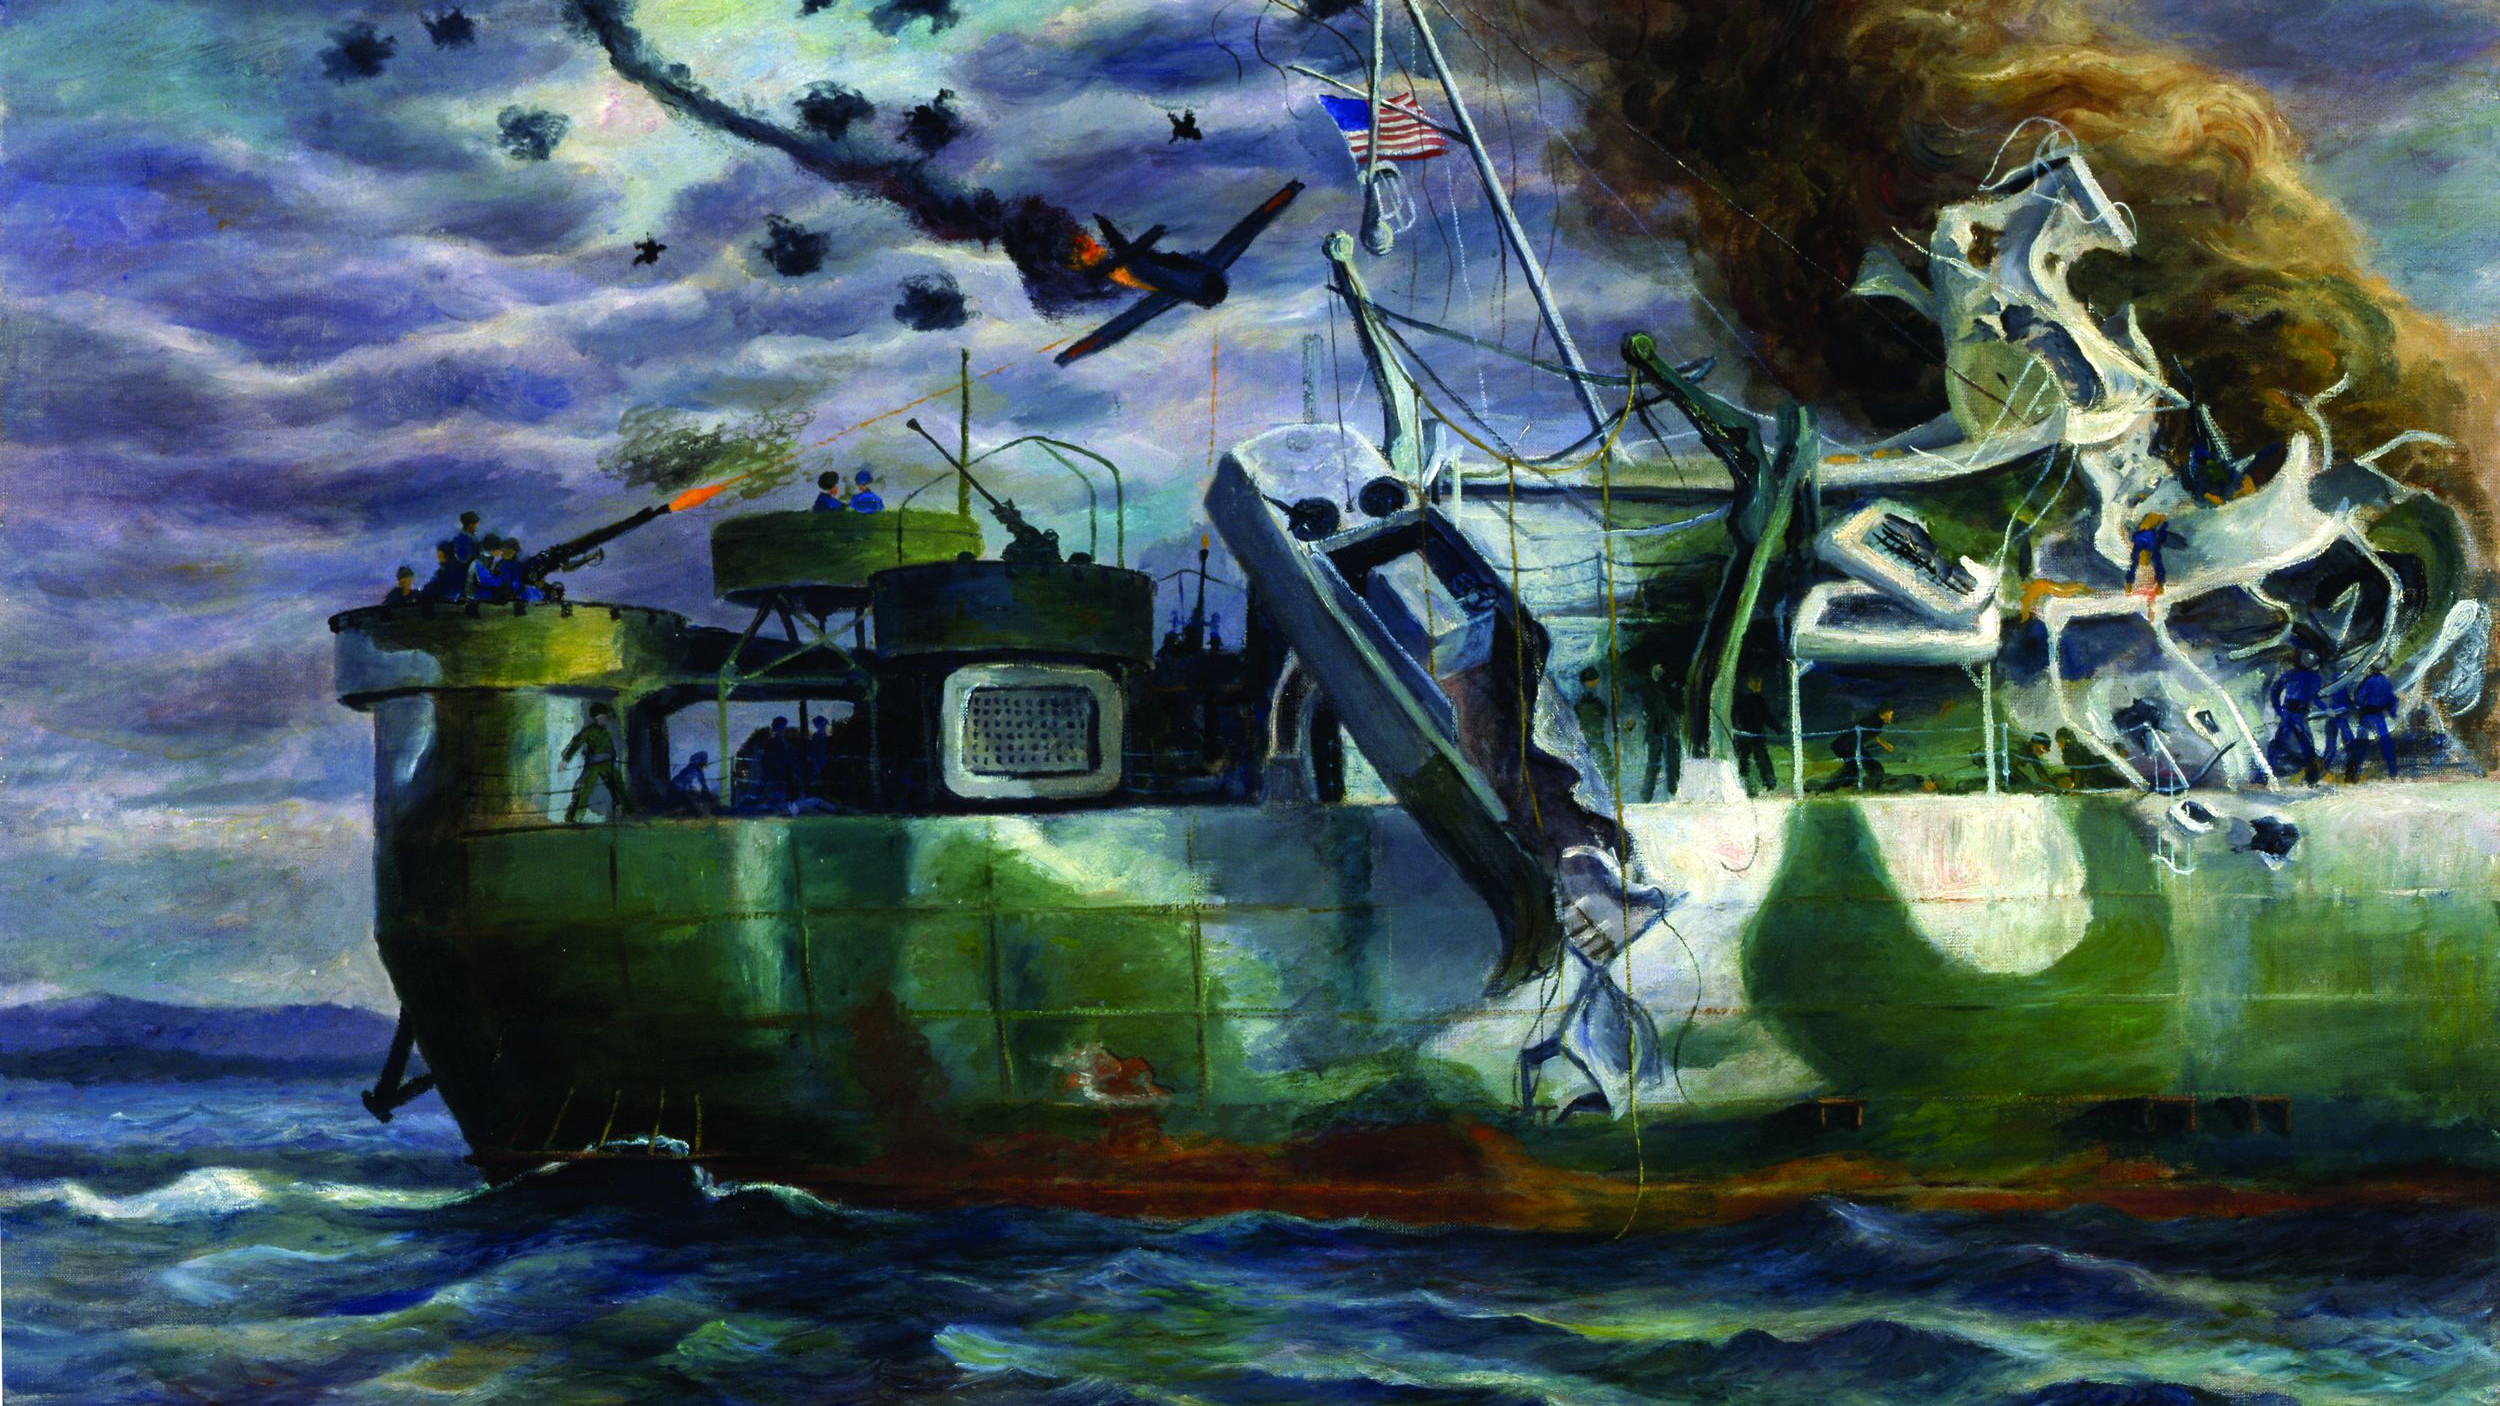 In his painting Suicide in Pairs, artist James Turnbull depicts a flaming Japanese kamikaze diving toward a stricken U.S. Navy transport vessel. Off Okinawa, the U.S. Navy endured the full fury of the desperate kamikaze attacks. (Naval Historical Foundation)